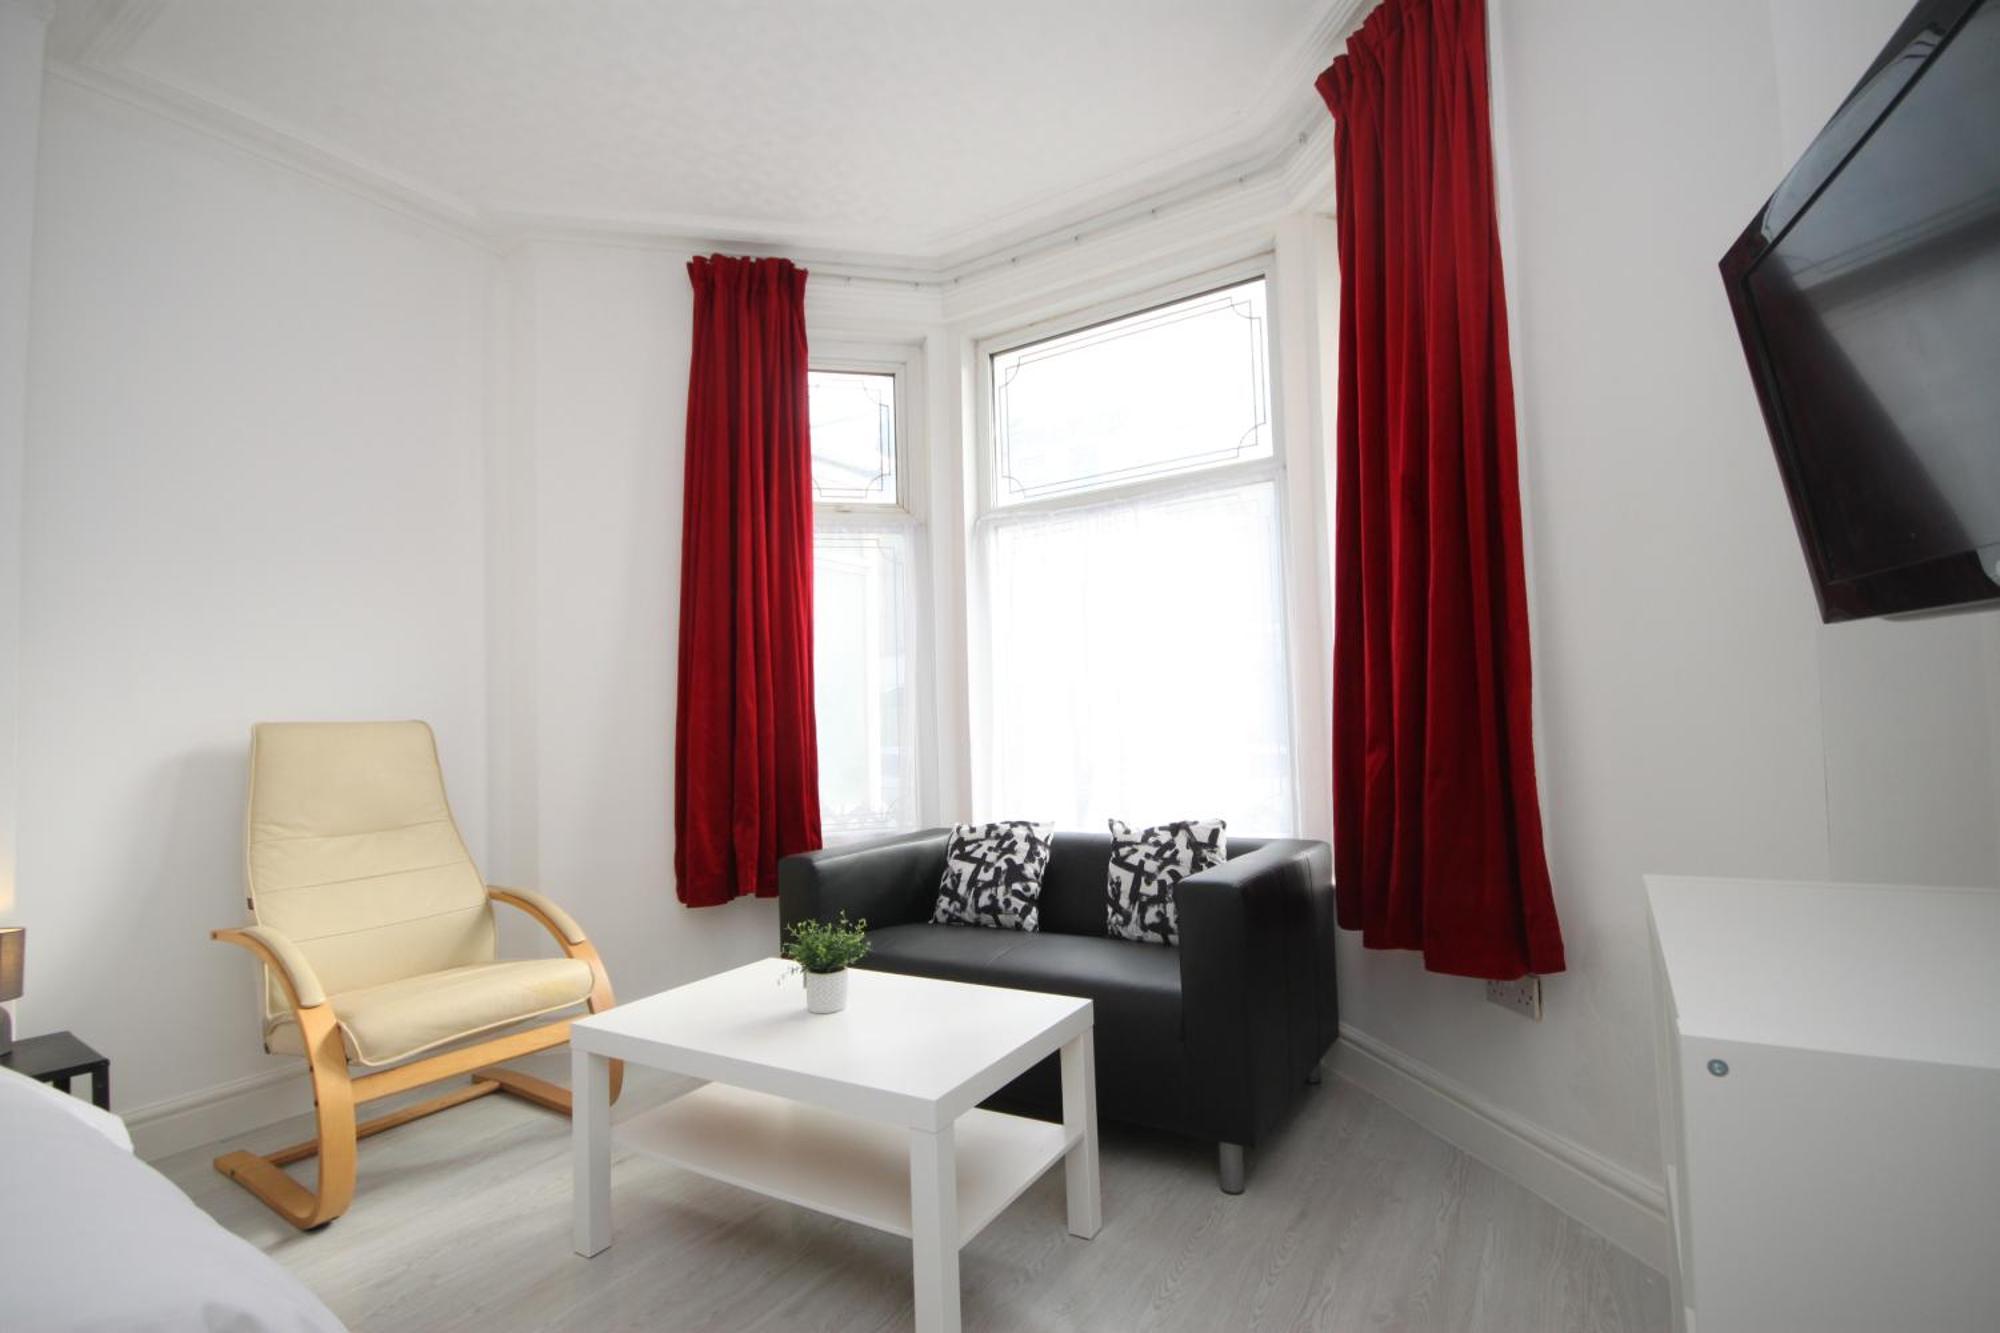 Barton Beachside Apartments - Free Parking, Modern Chic, Central Beach Location, Some Sea Views - Families Couples Or Over 23 Years Blackpool Habitación foto